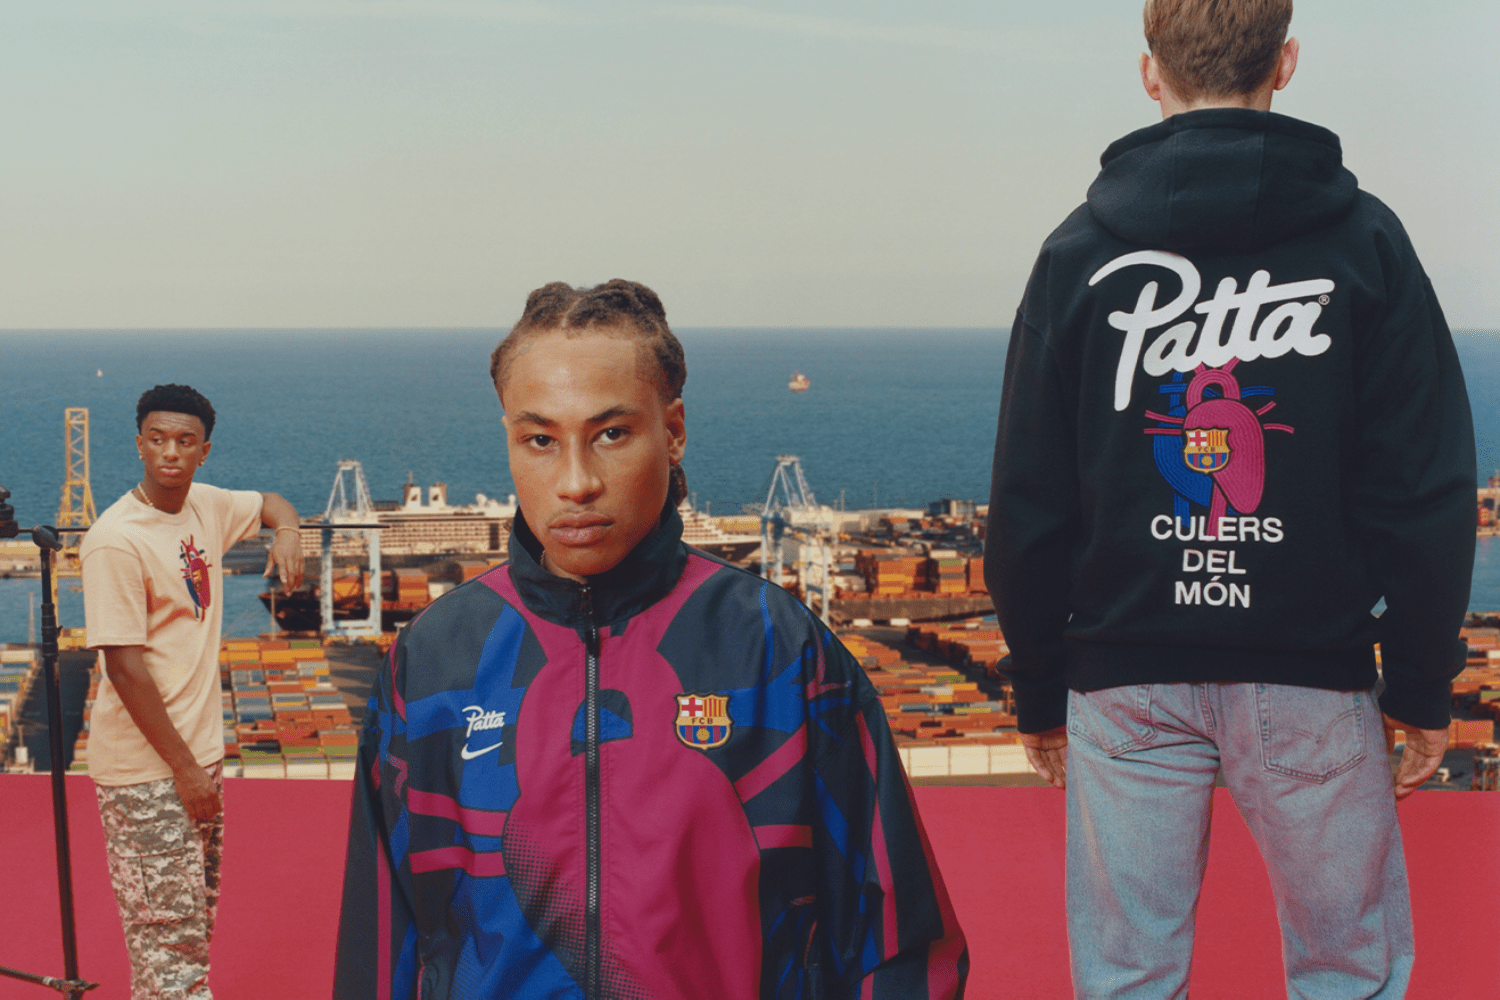 The Patta x FC Barcelona collection will be dropping soon